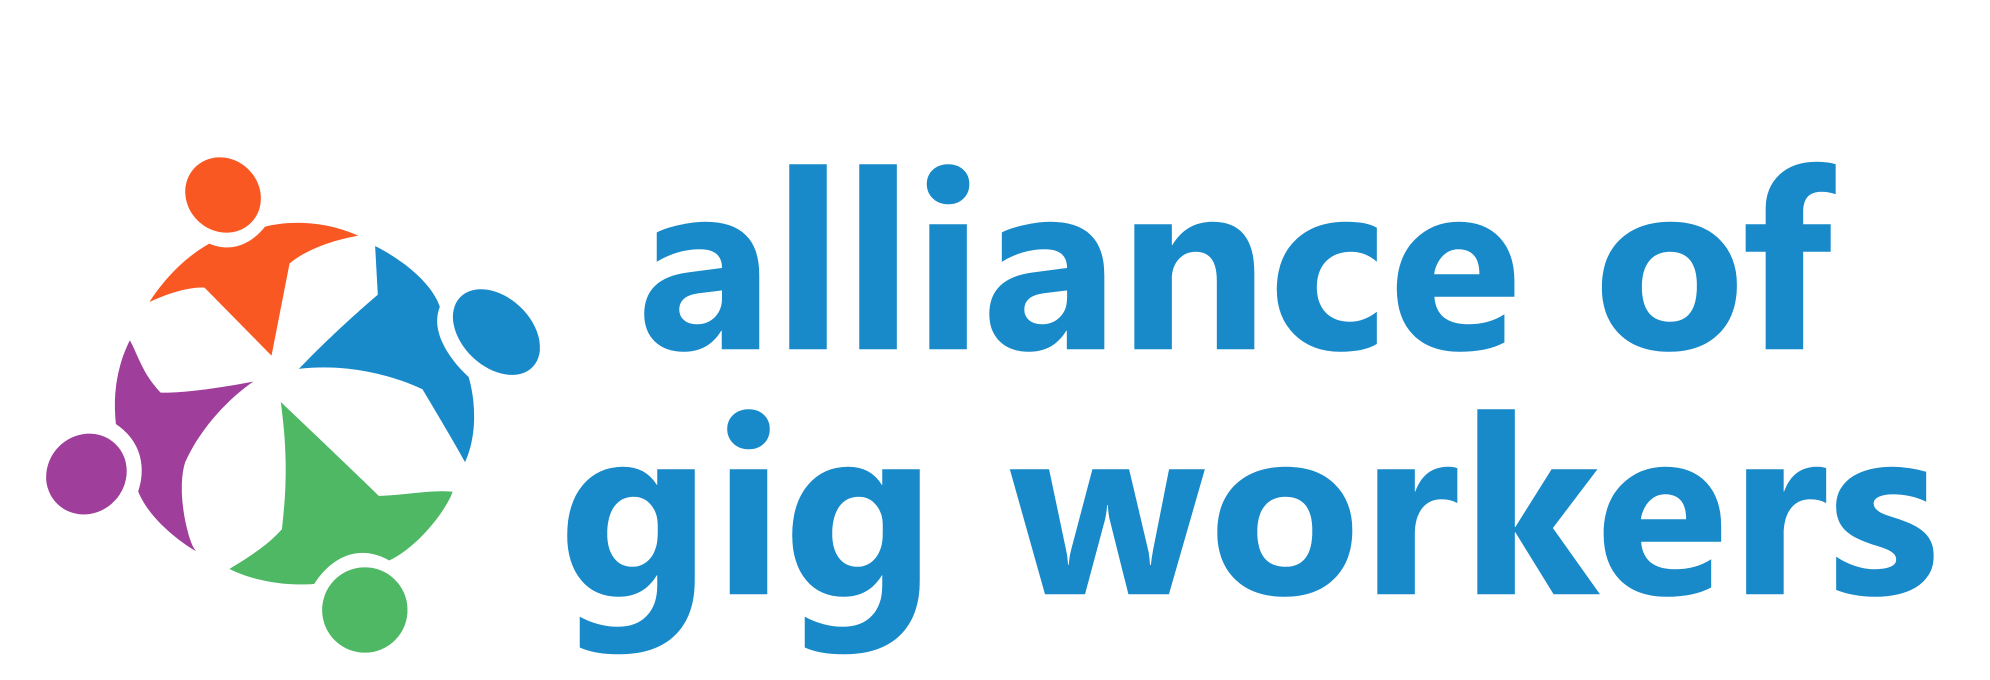 Alliance of Gig Workers Logo